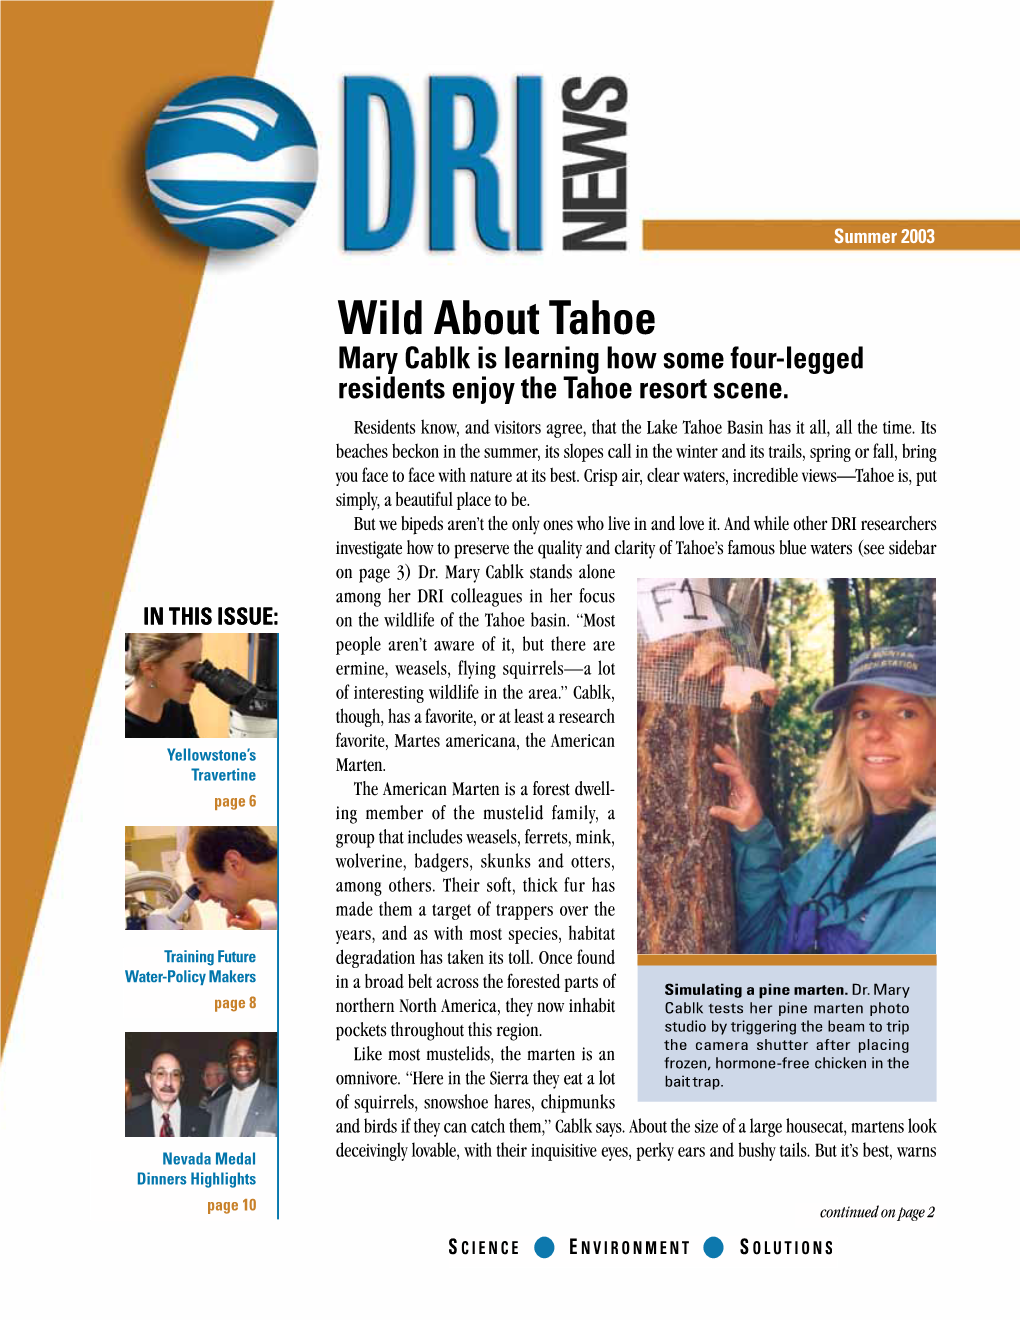 Wild About Tahoe Mary Cablk Is Learning How Some Four-Legged Residents Enjoy the Tahoe Resort Scene